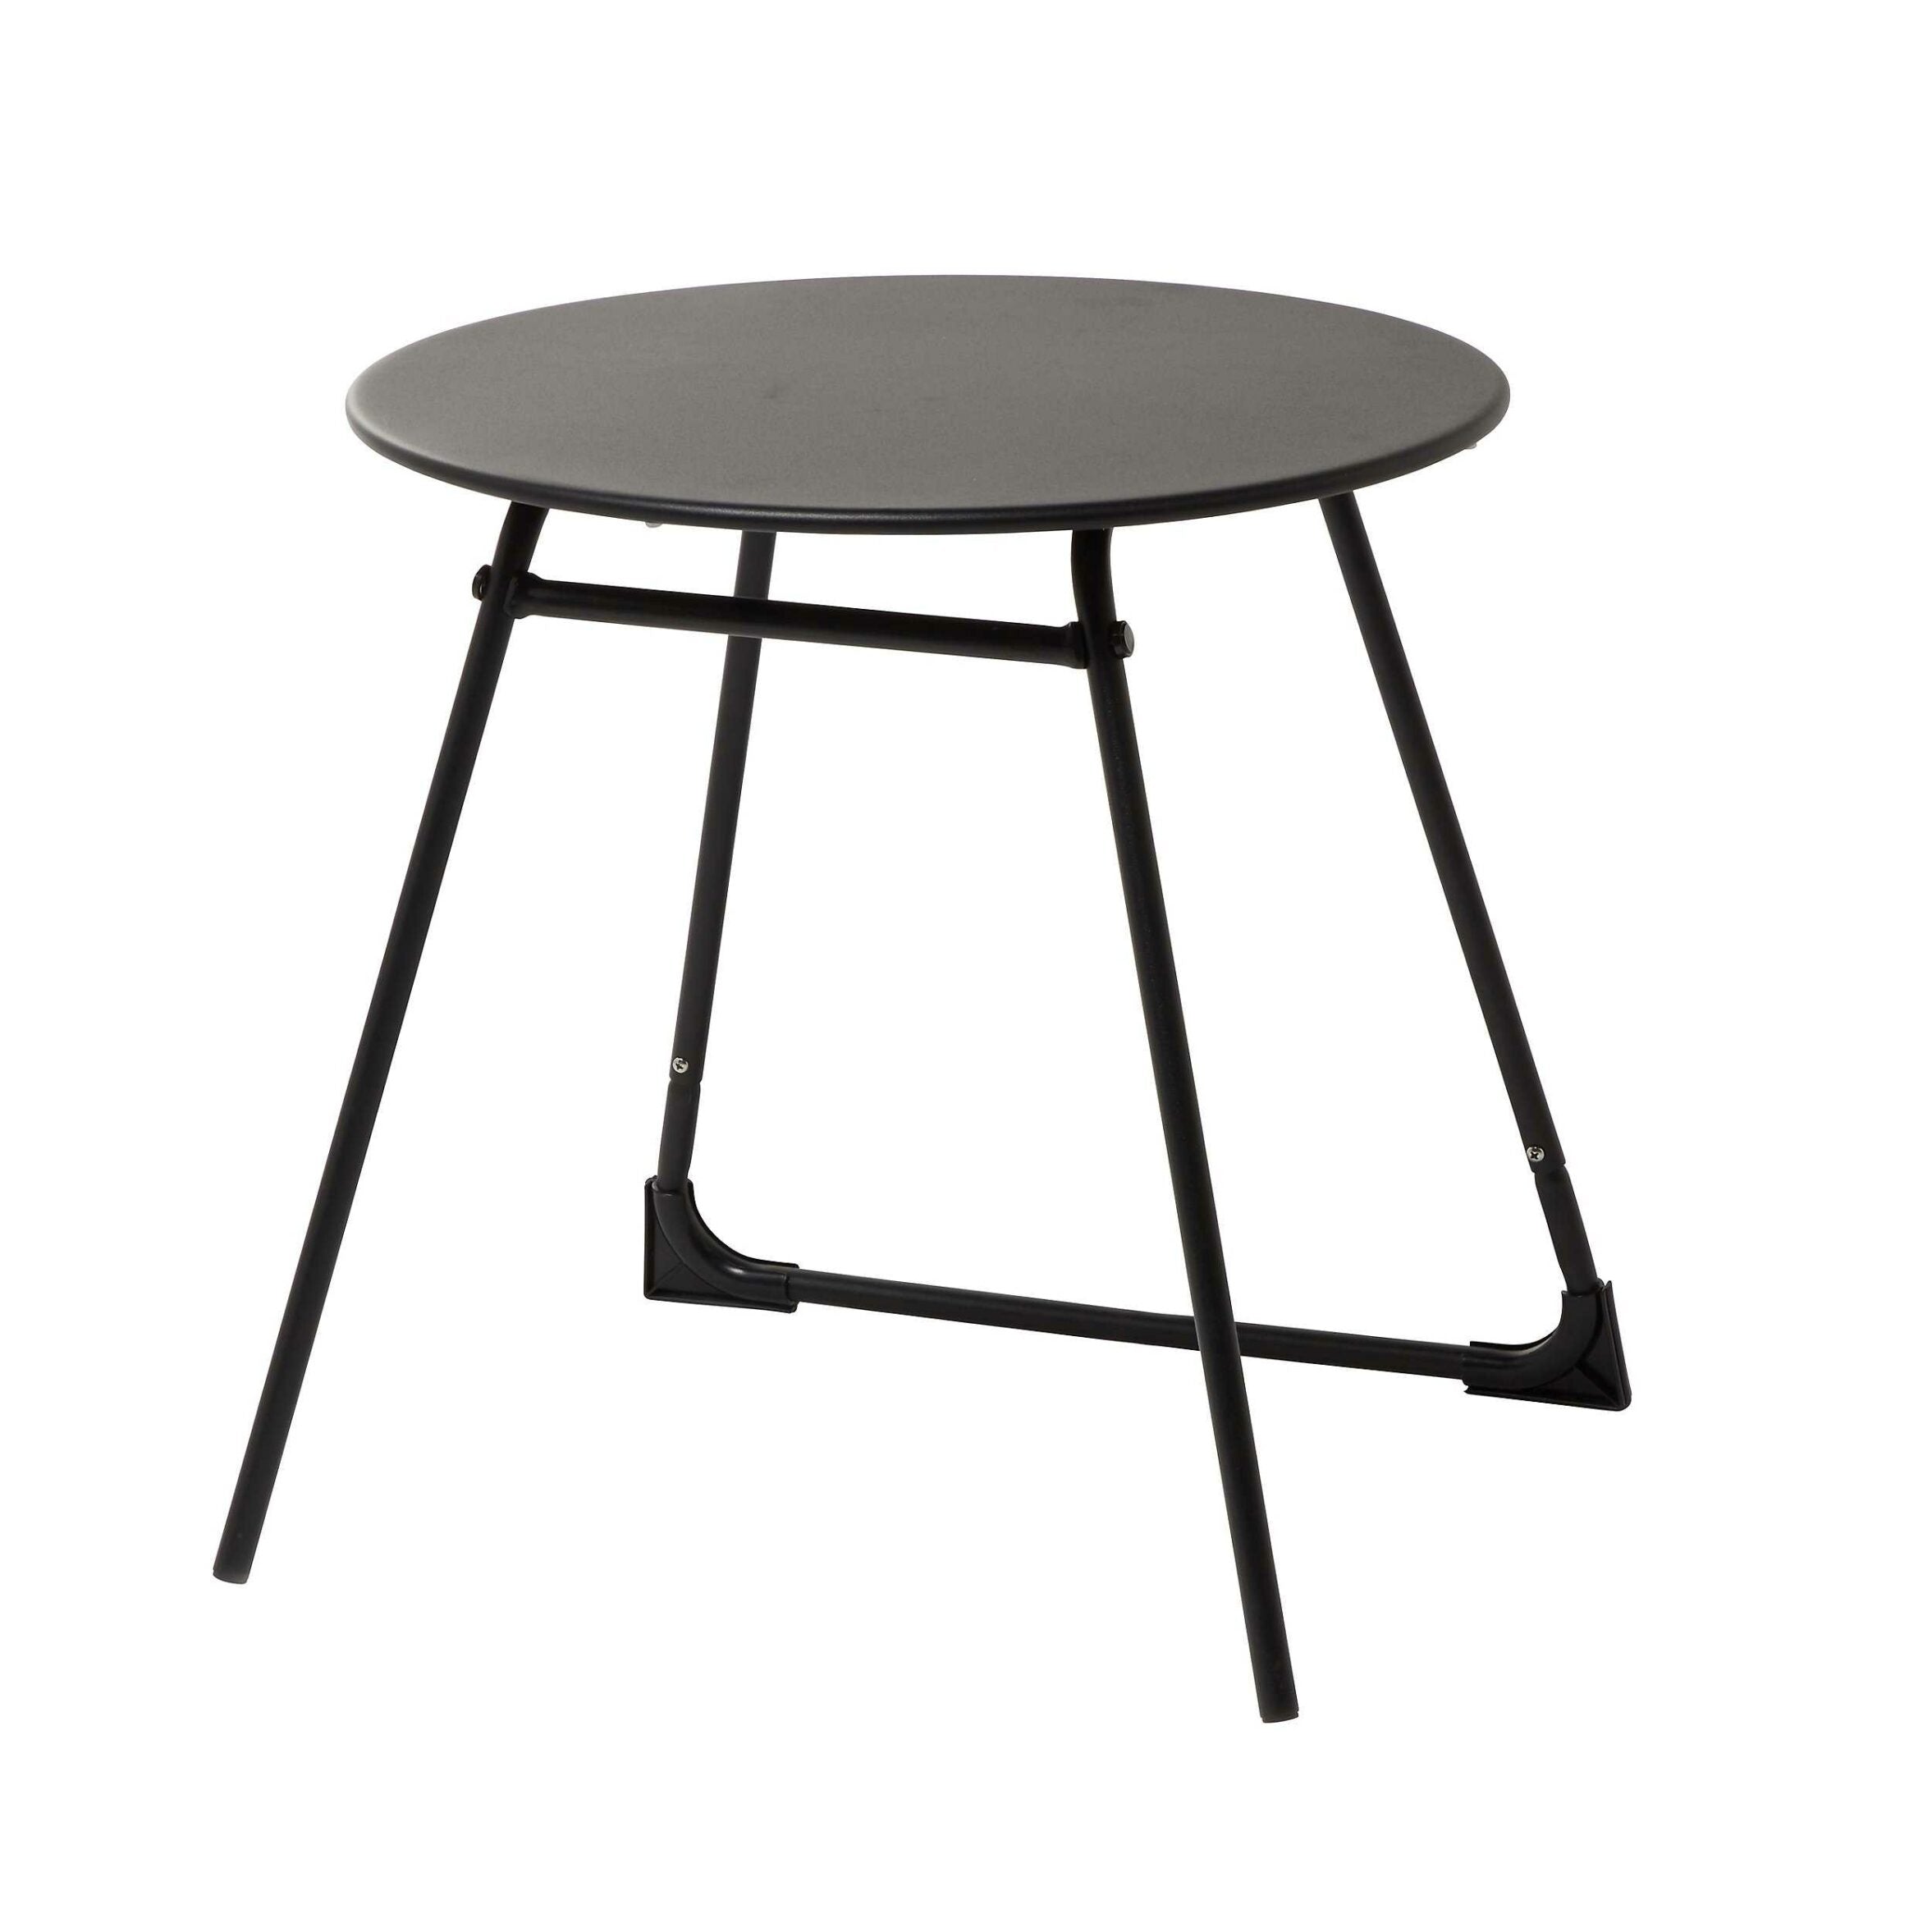 Garden Table GoodHome Morillo Metal Table Water resistant 500mm - Black Pack of 2- 4055